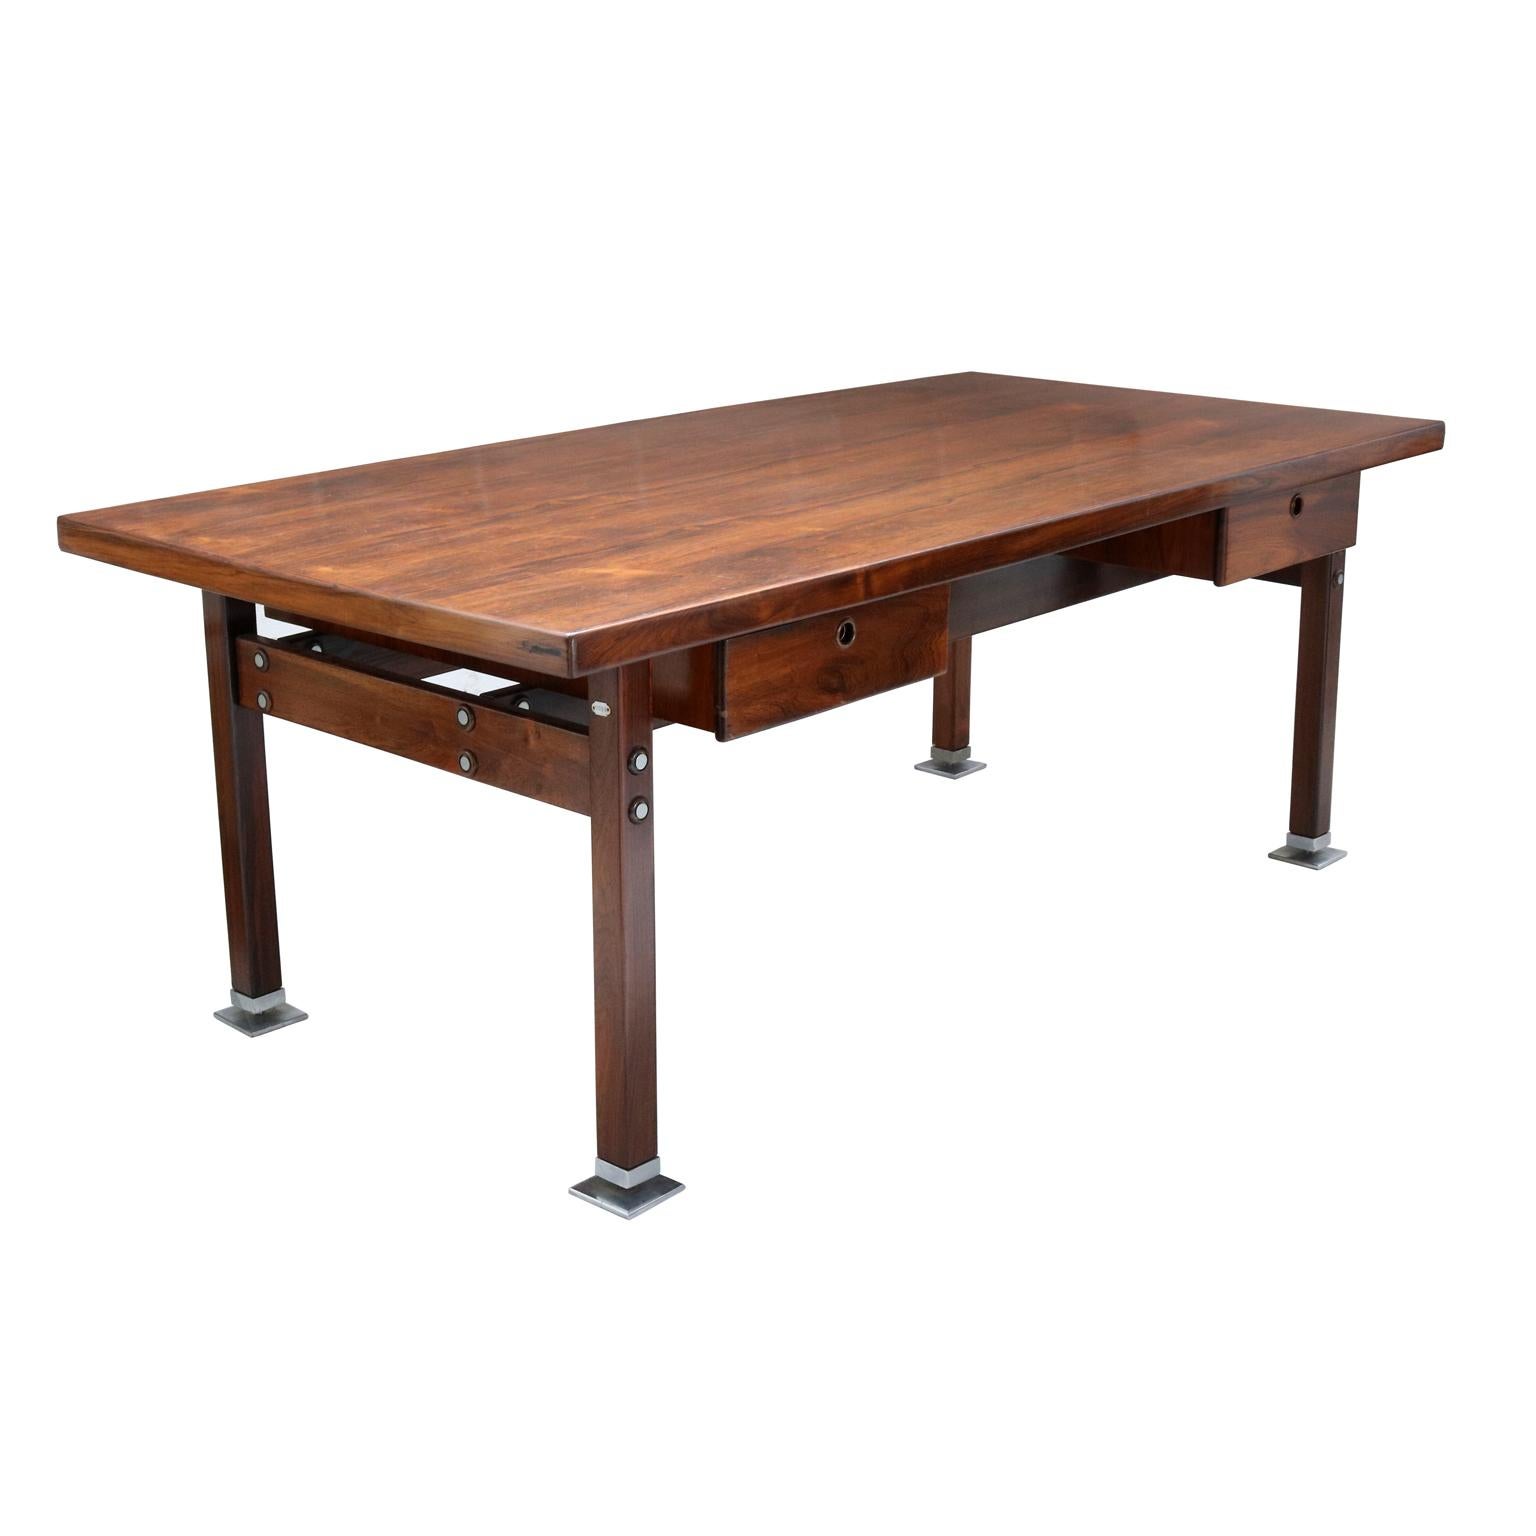 Brazilian Midcentury Desk Table Designed by Sergio Rodrigues